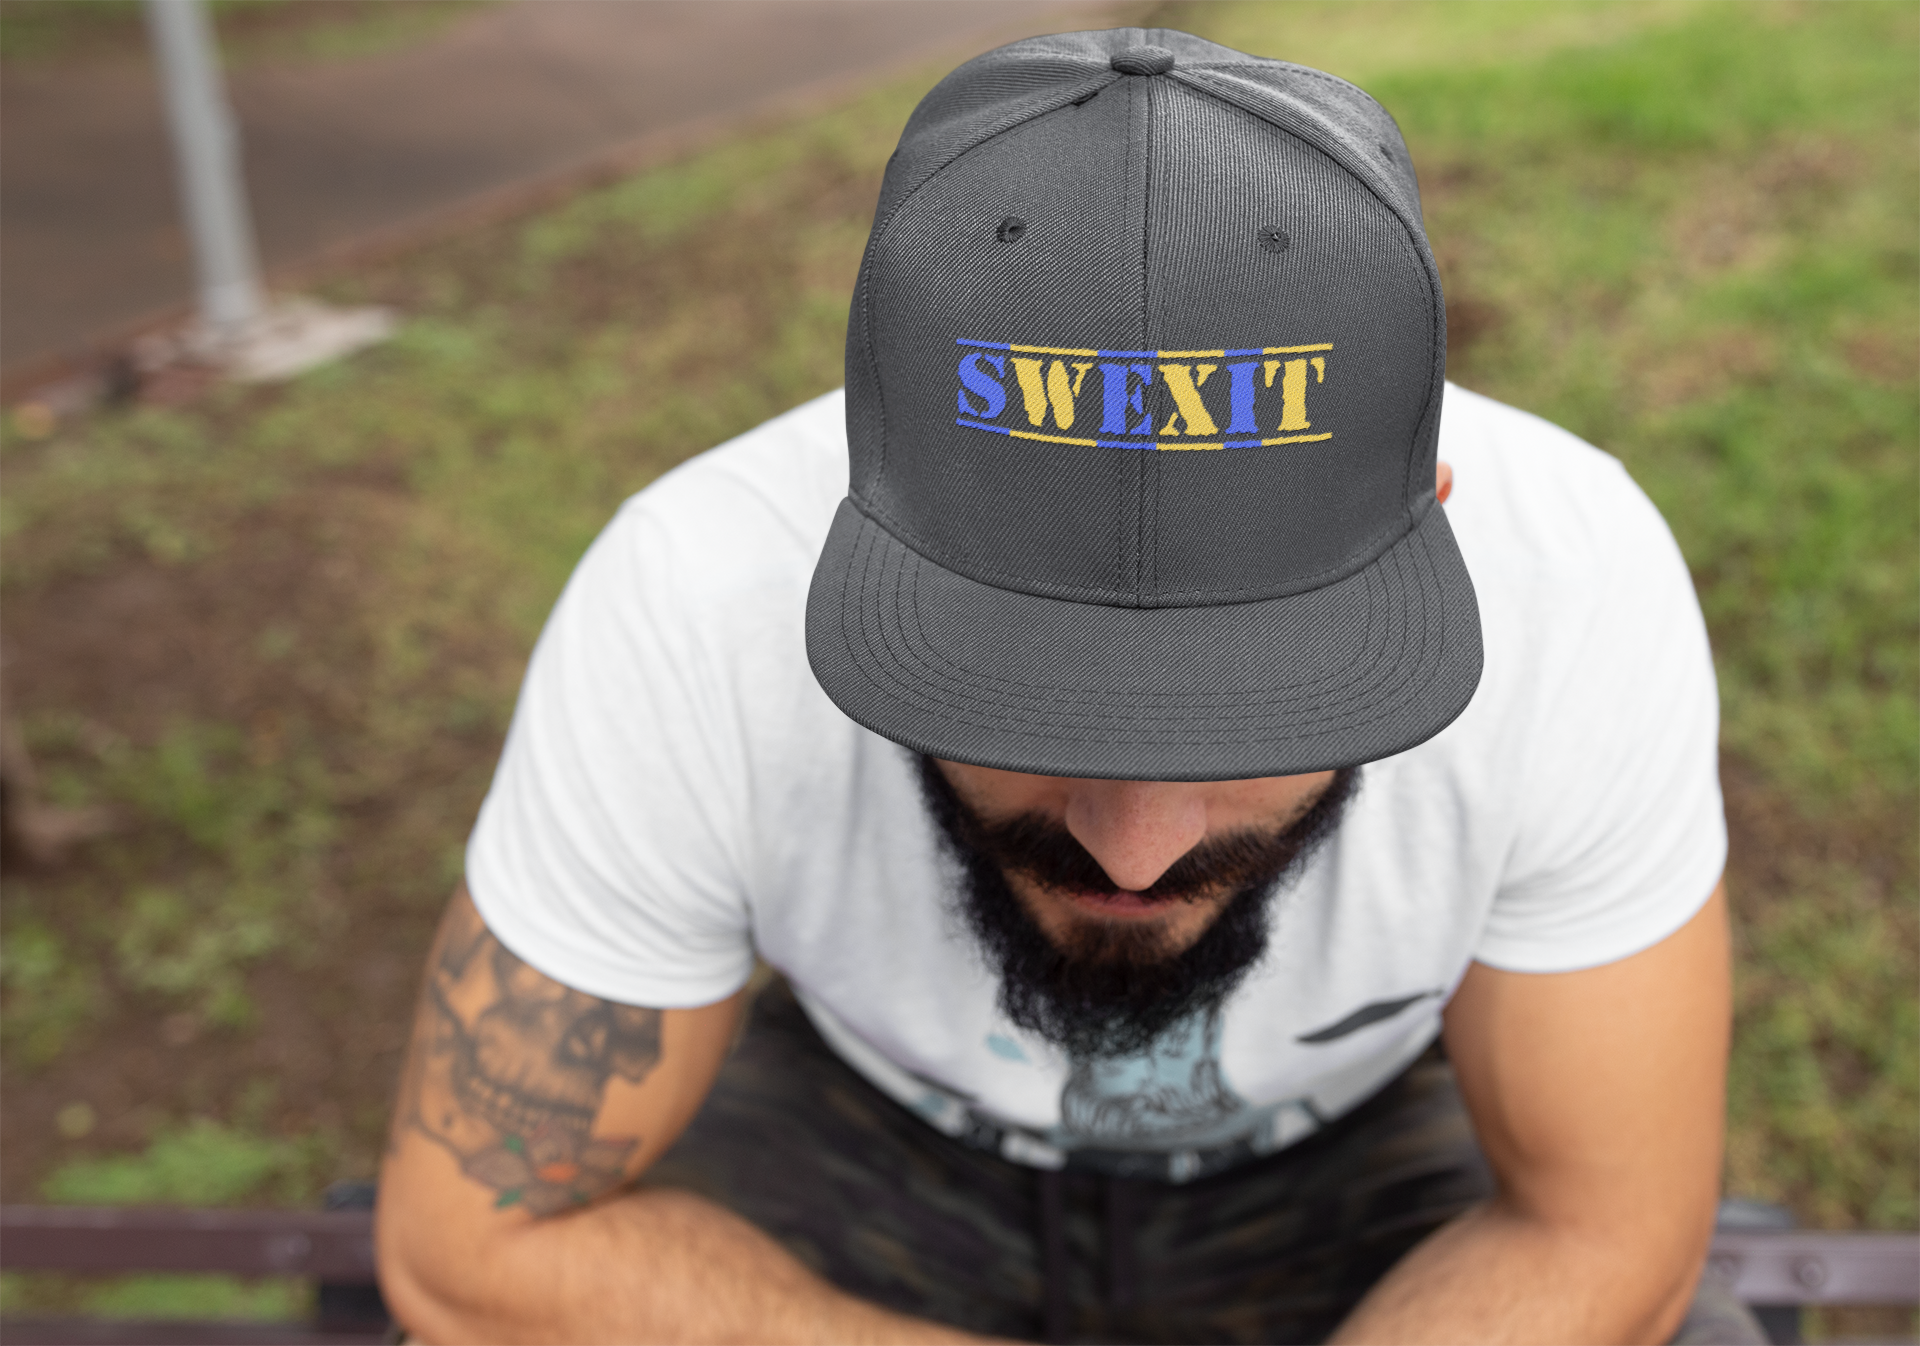 SWEXIT Snapback One Size